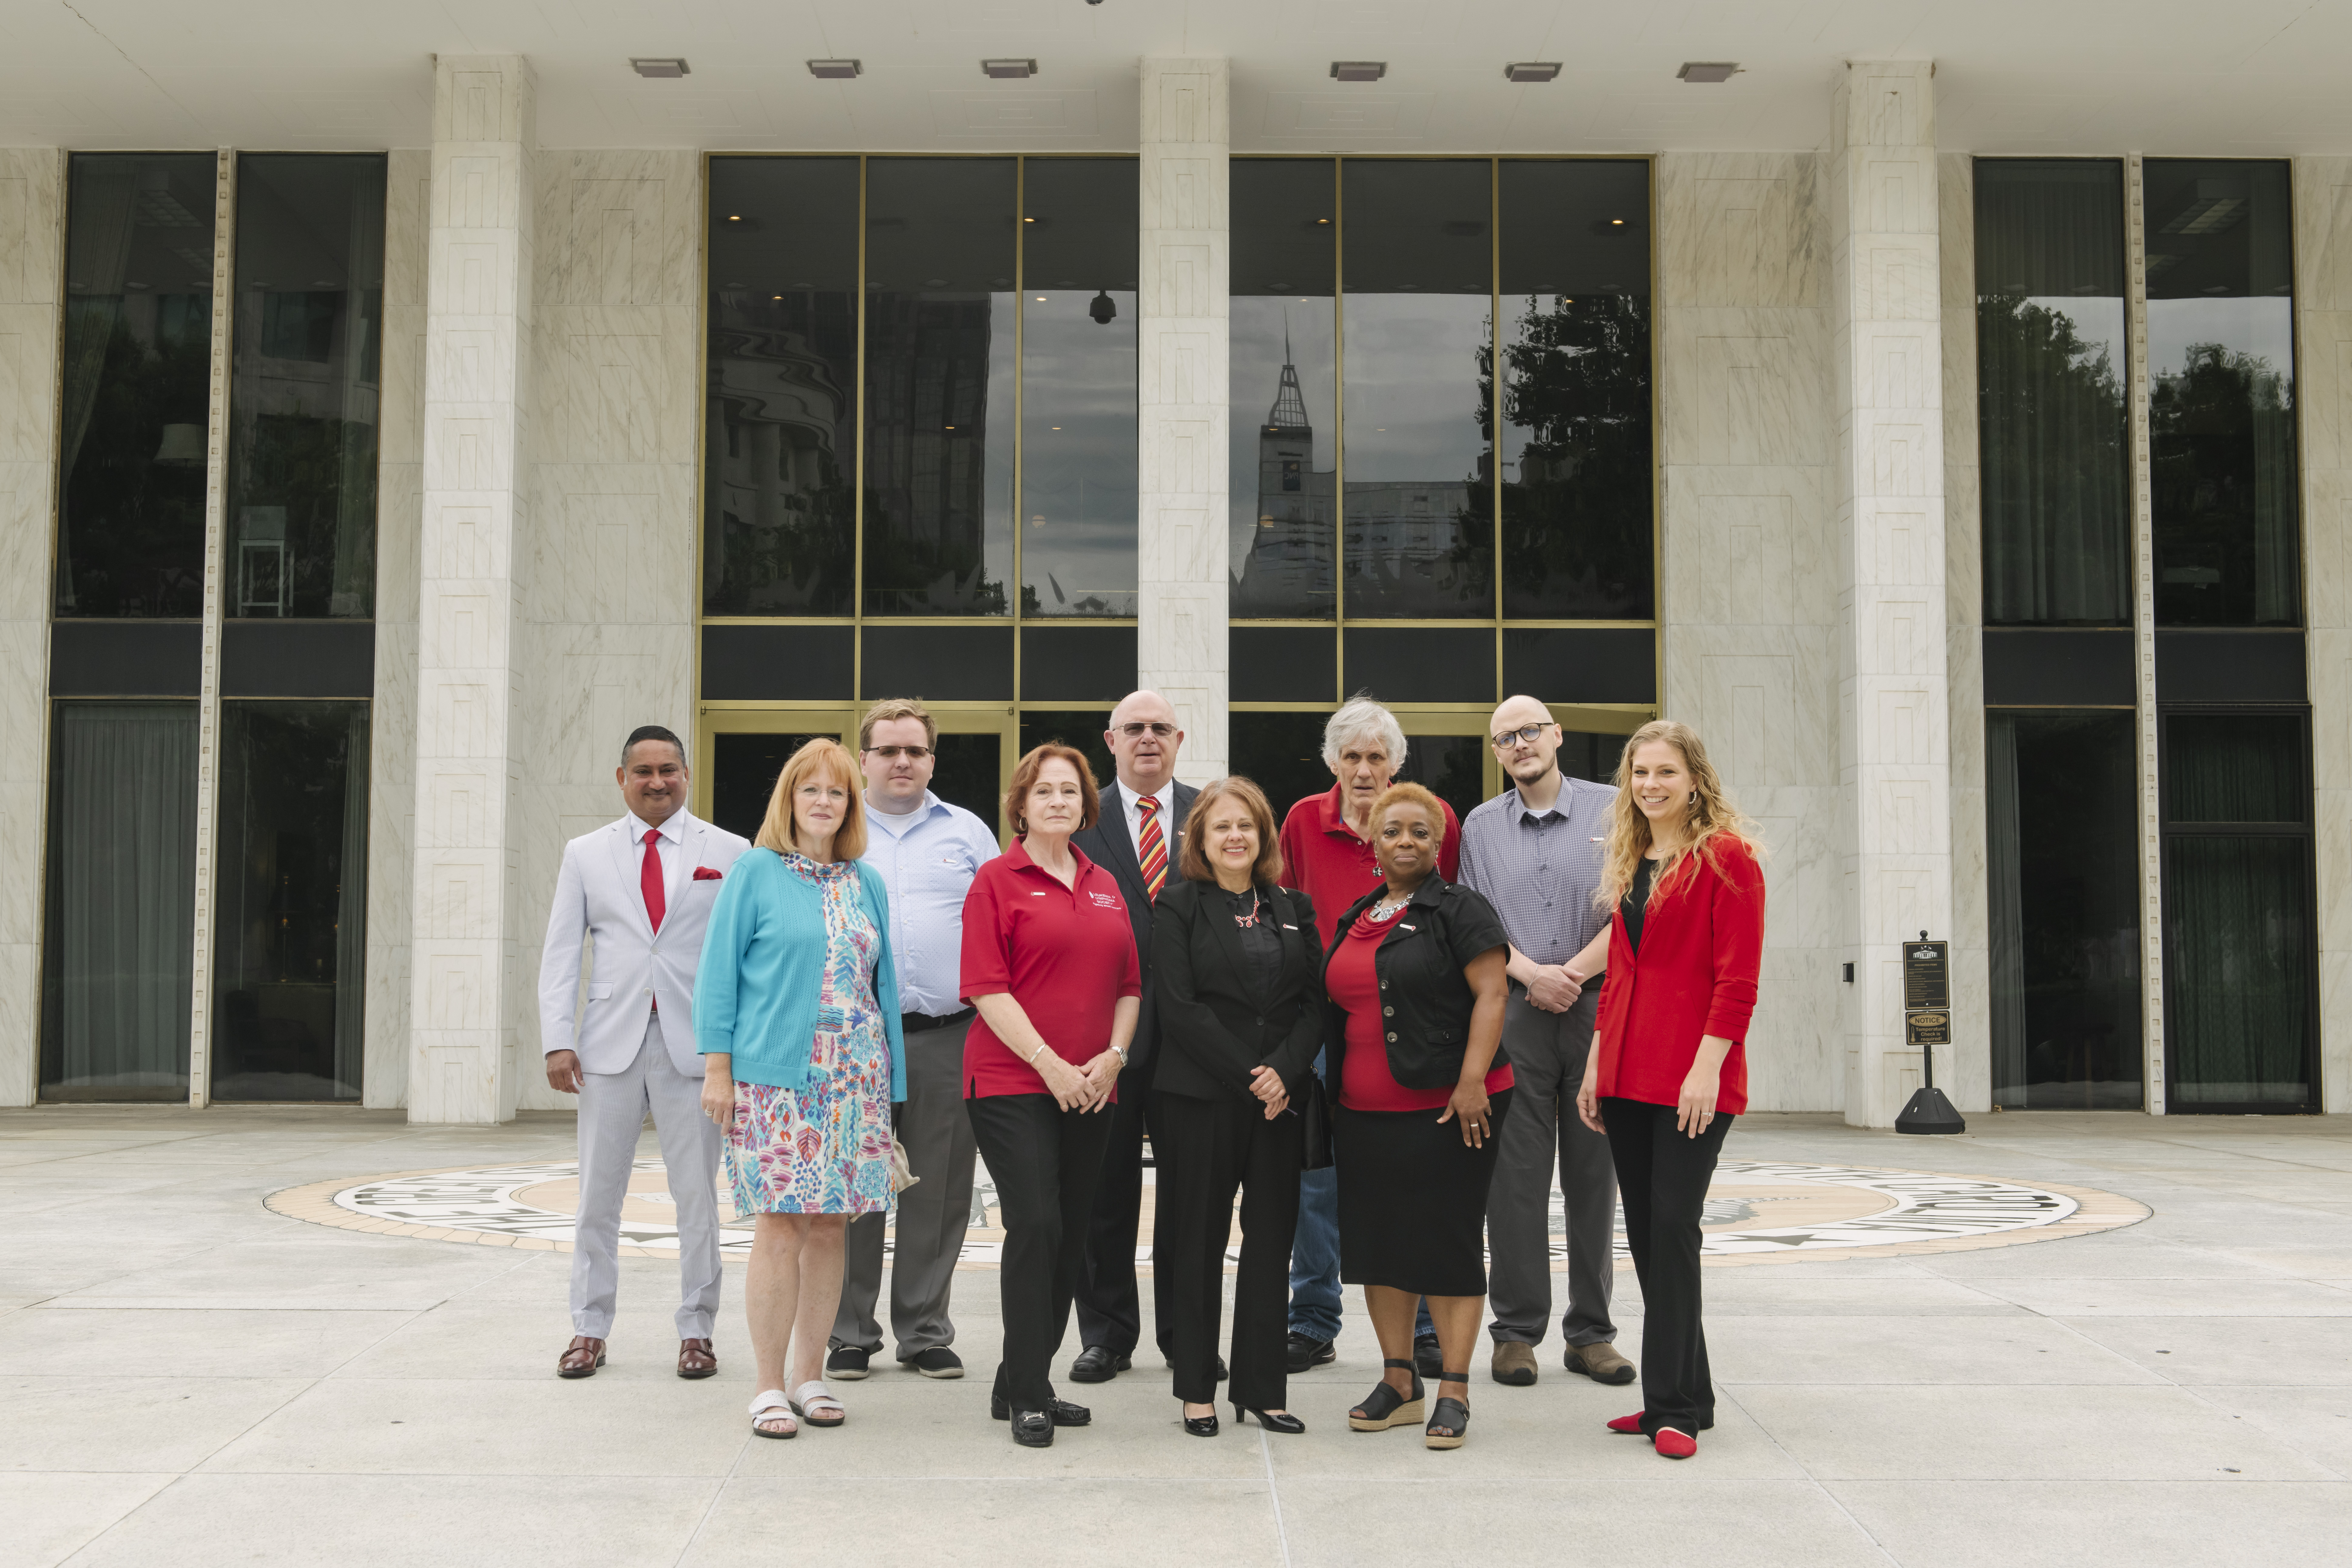 Advocates and LLS staff gather in Raleigh to urge lawmakers to pass Medicaid expansion